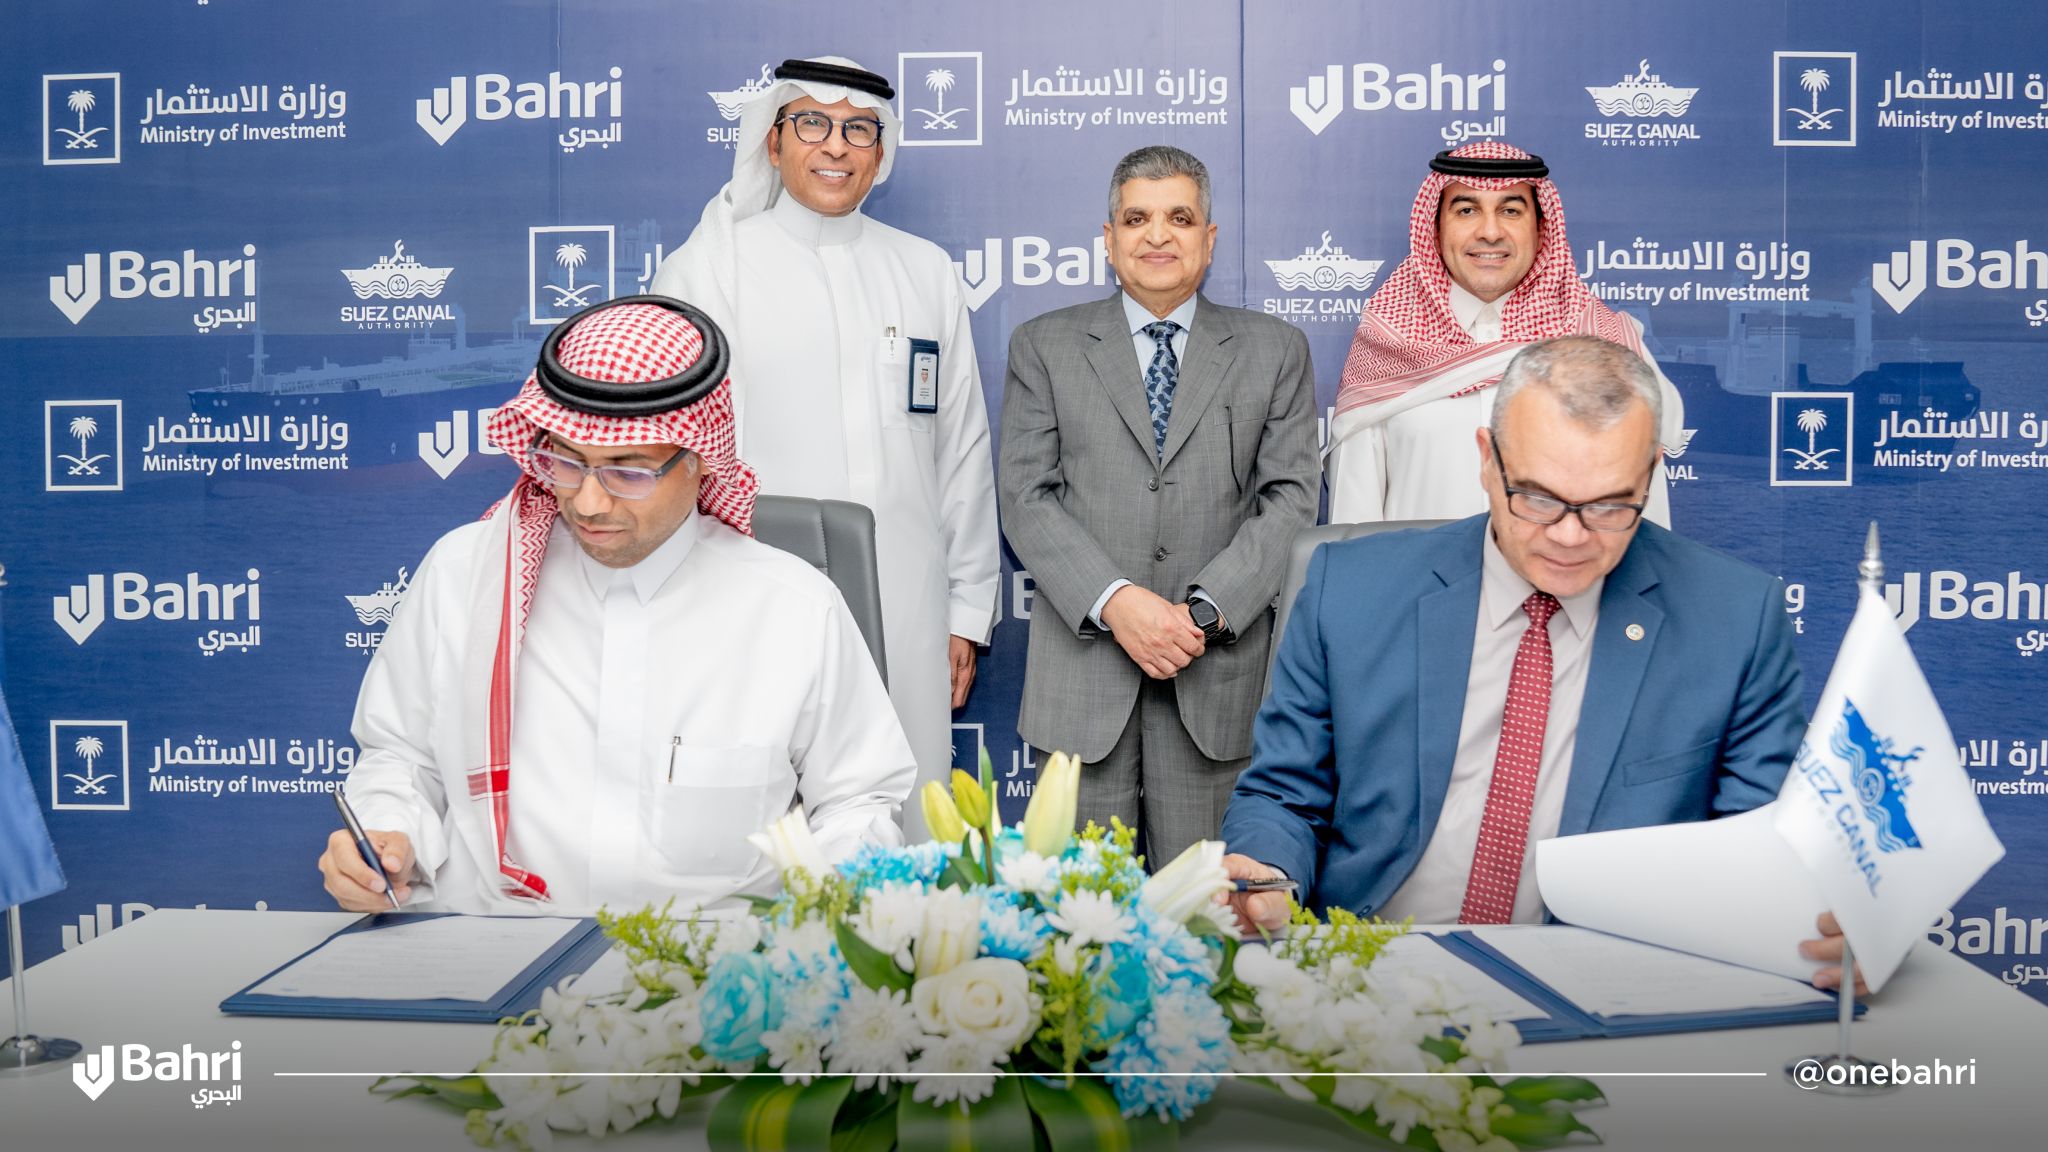 Bahri inks non-binding MoU with Suez Canal Authority for cooperation in establishing a joint venture